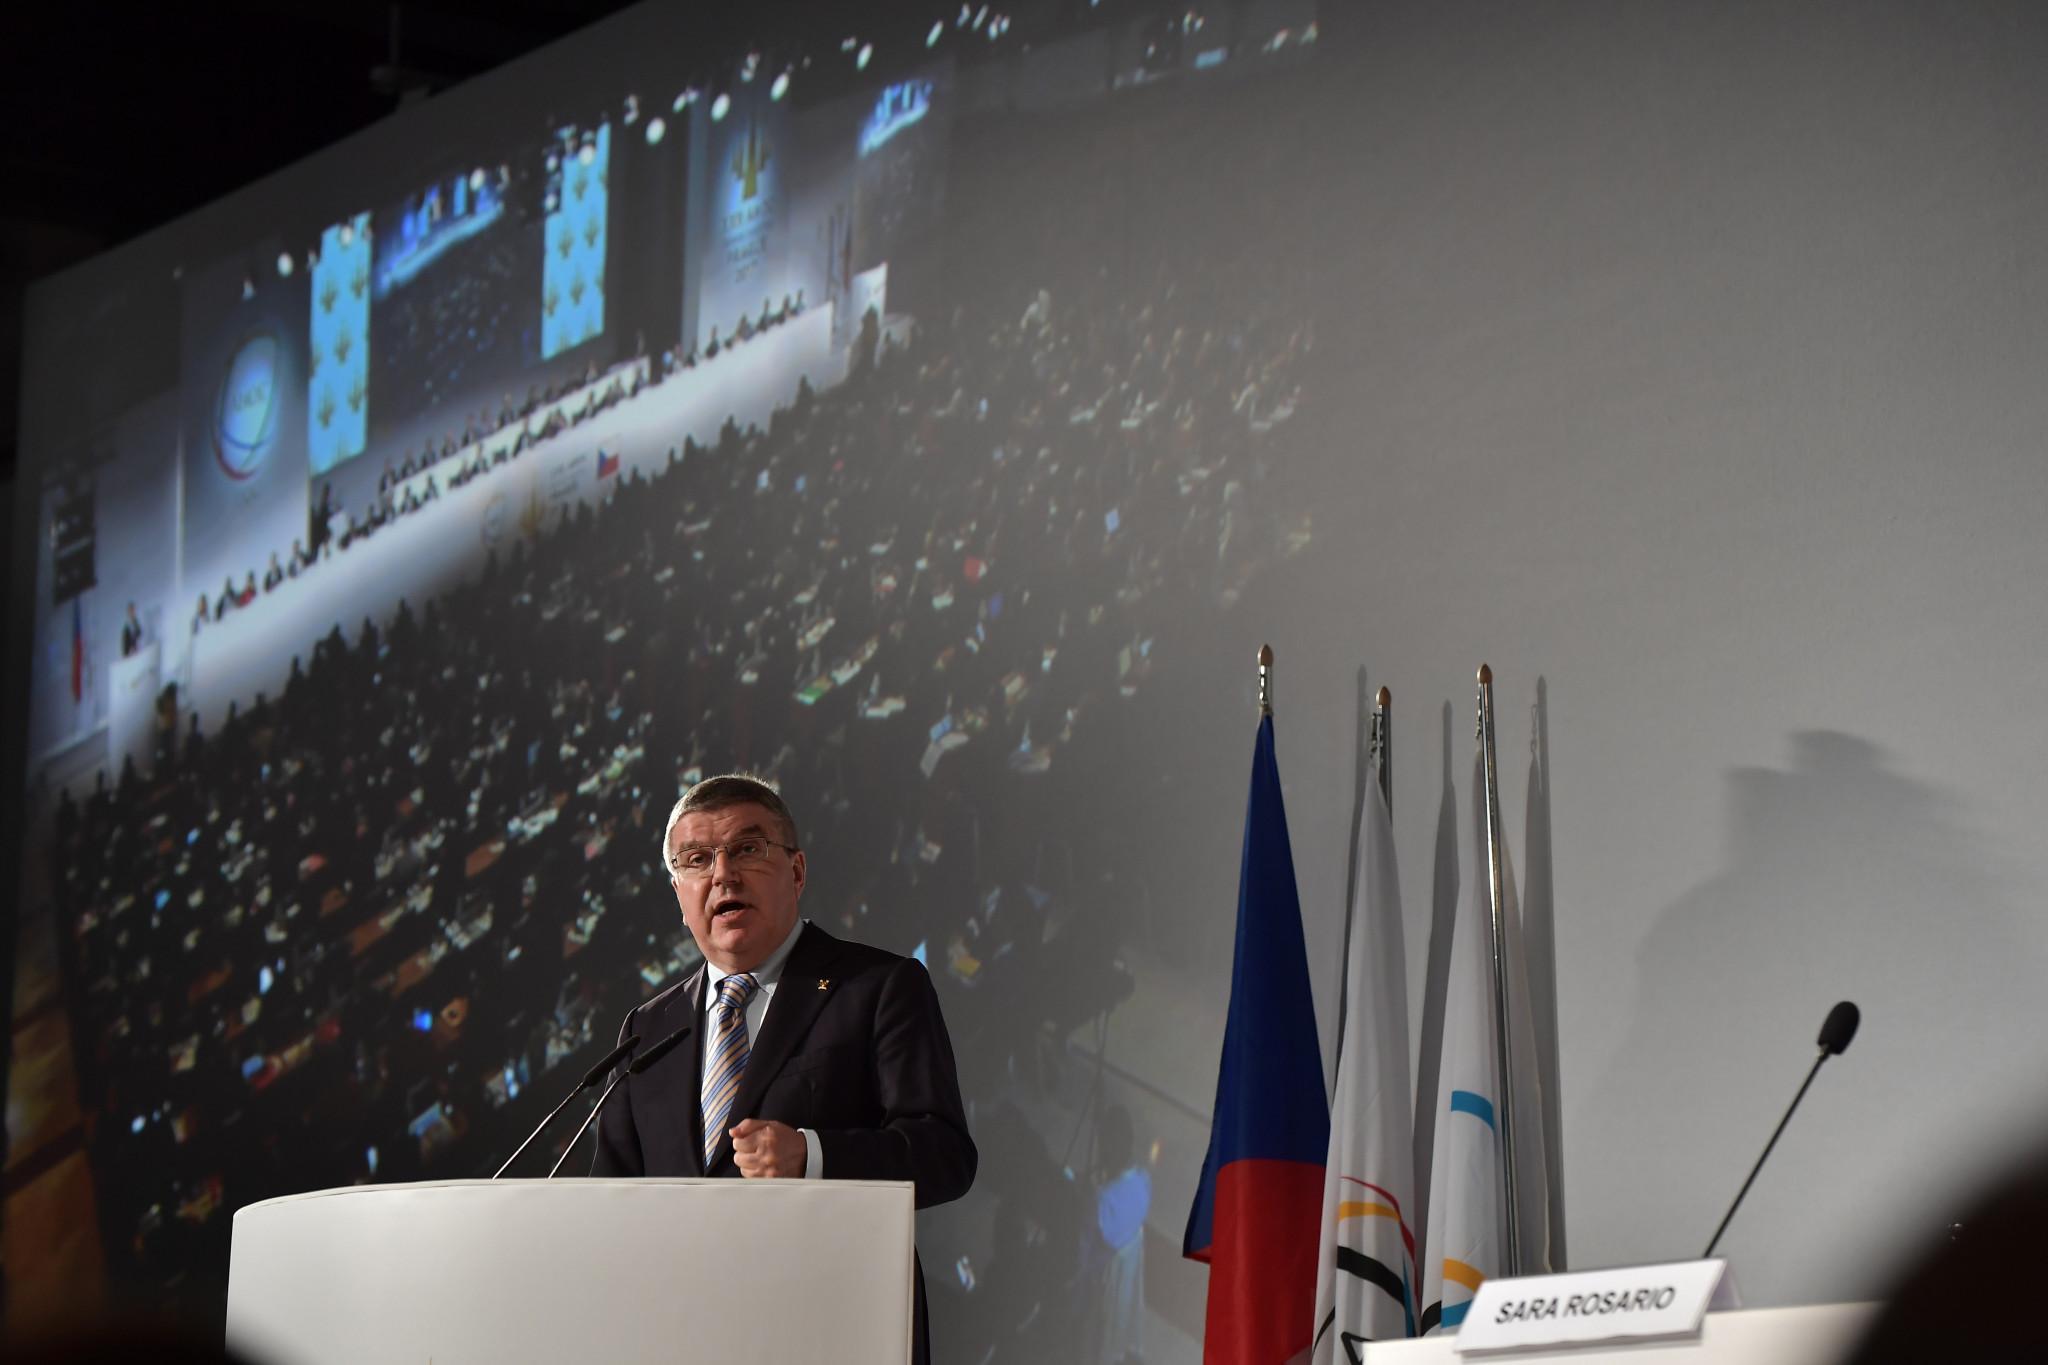 Thomas Bach delivered a keynote address at the ANOC General Assembly meeting today ©Getty Images